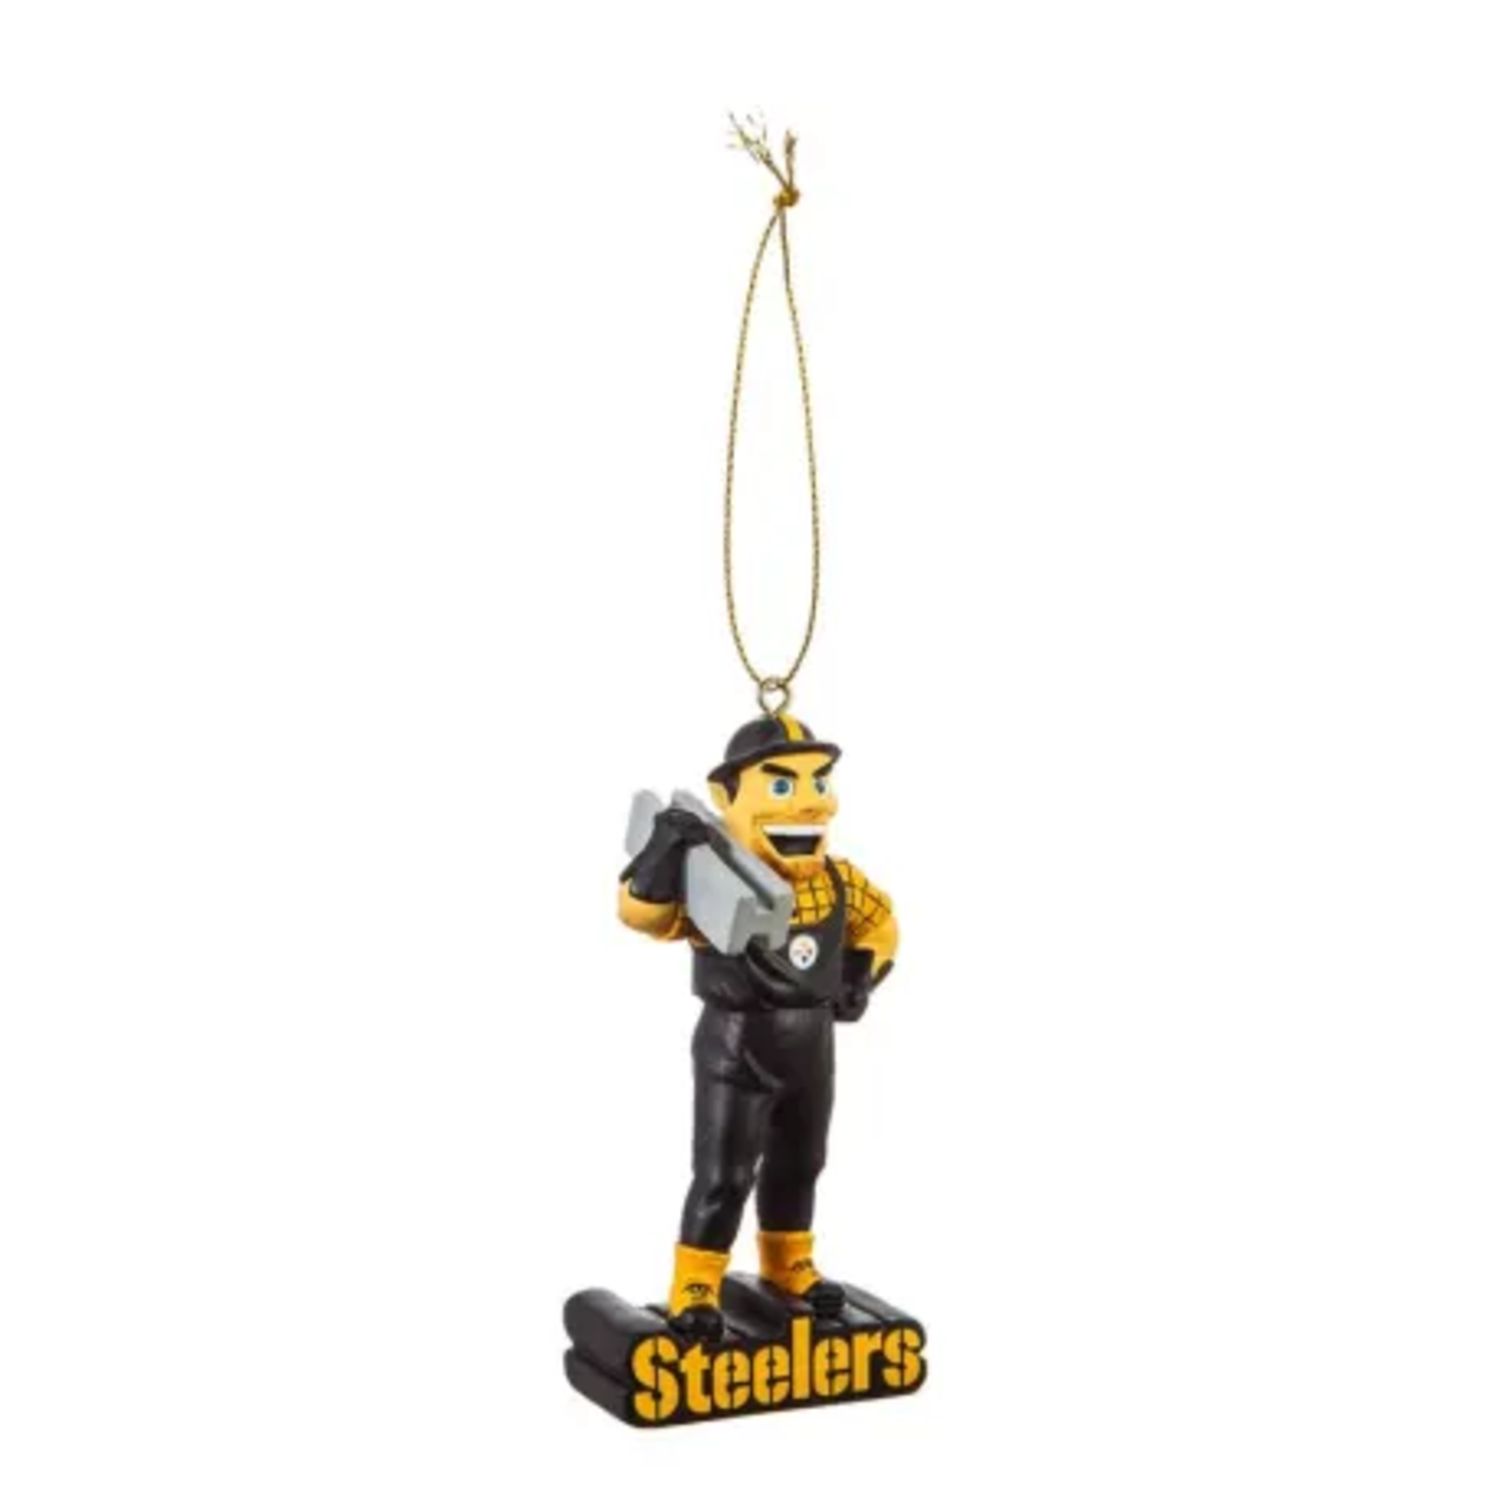 NFL Pittsburgh Steelers Mascot Statue Ornament - The Locker Room of Downey